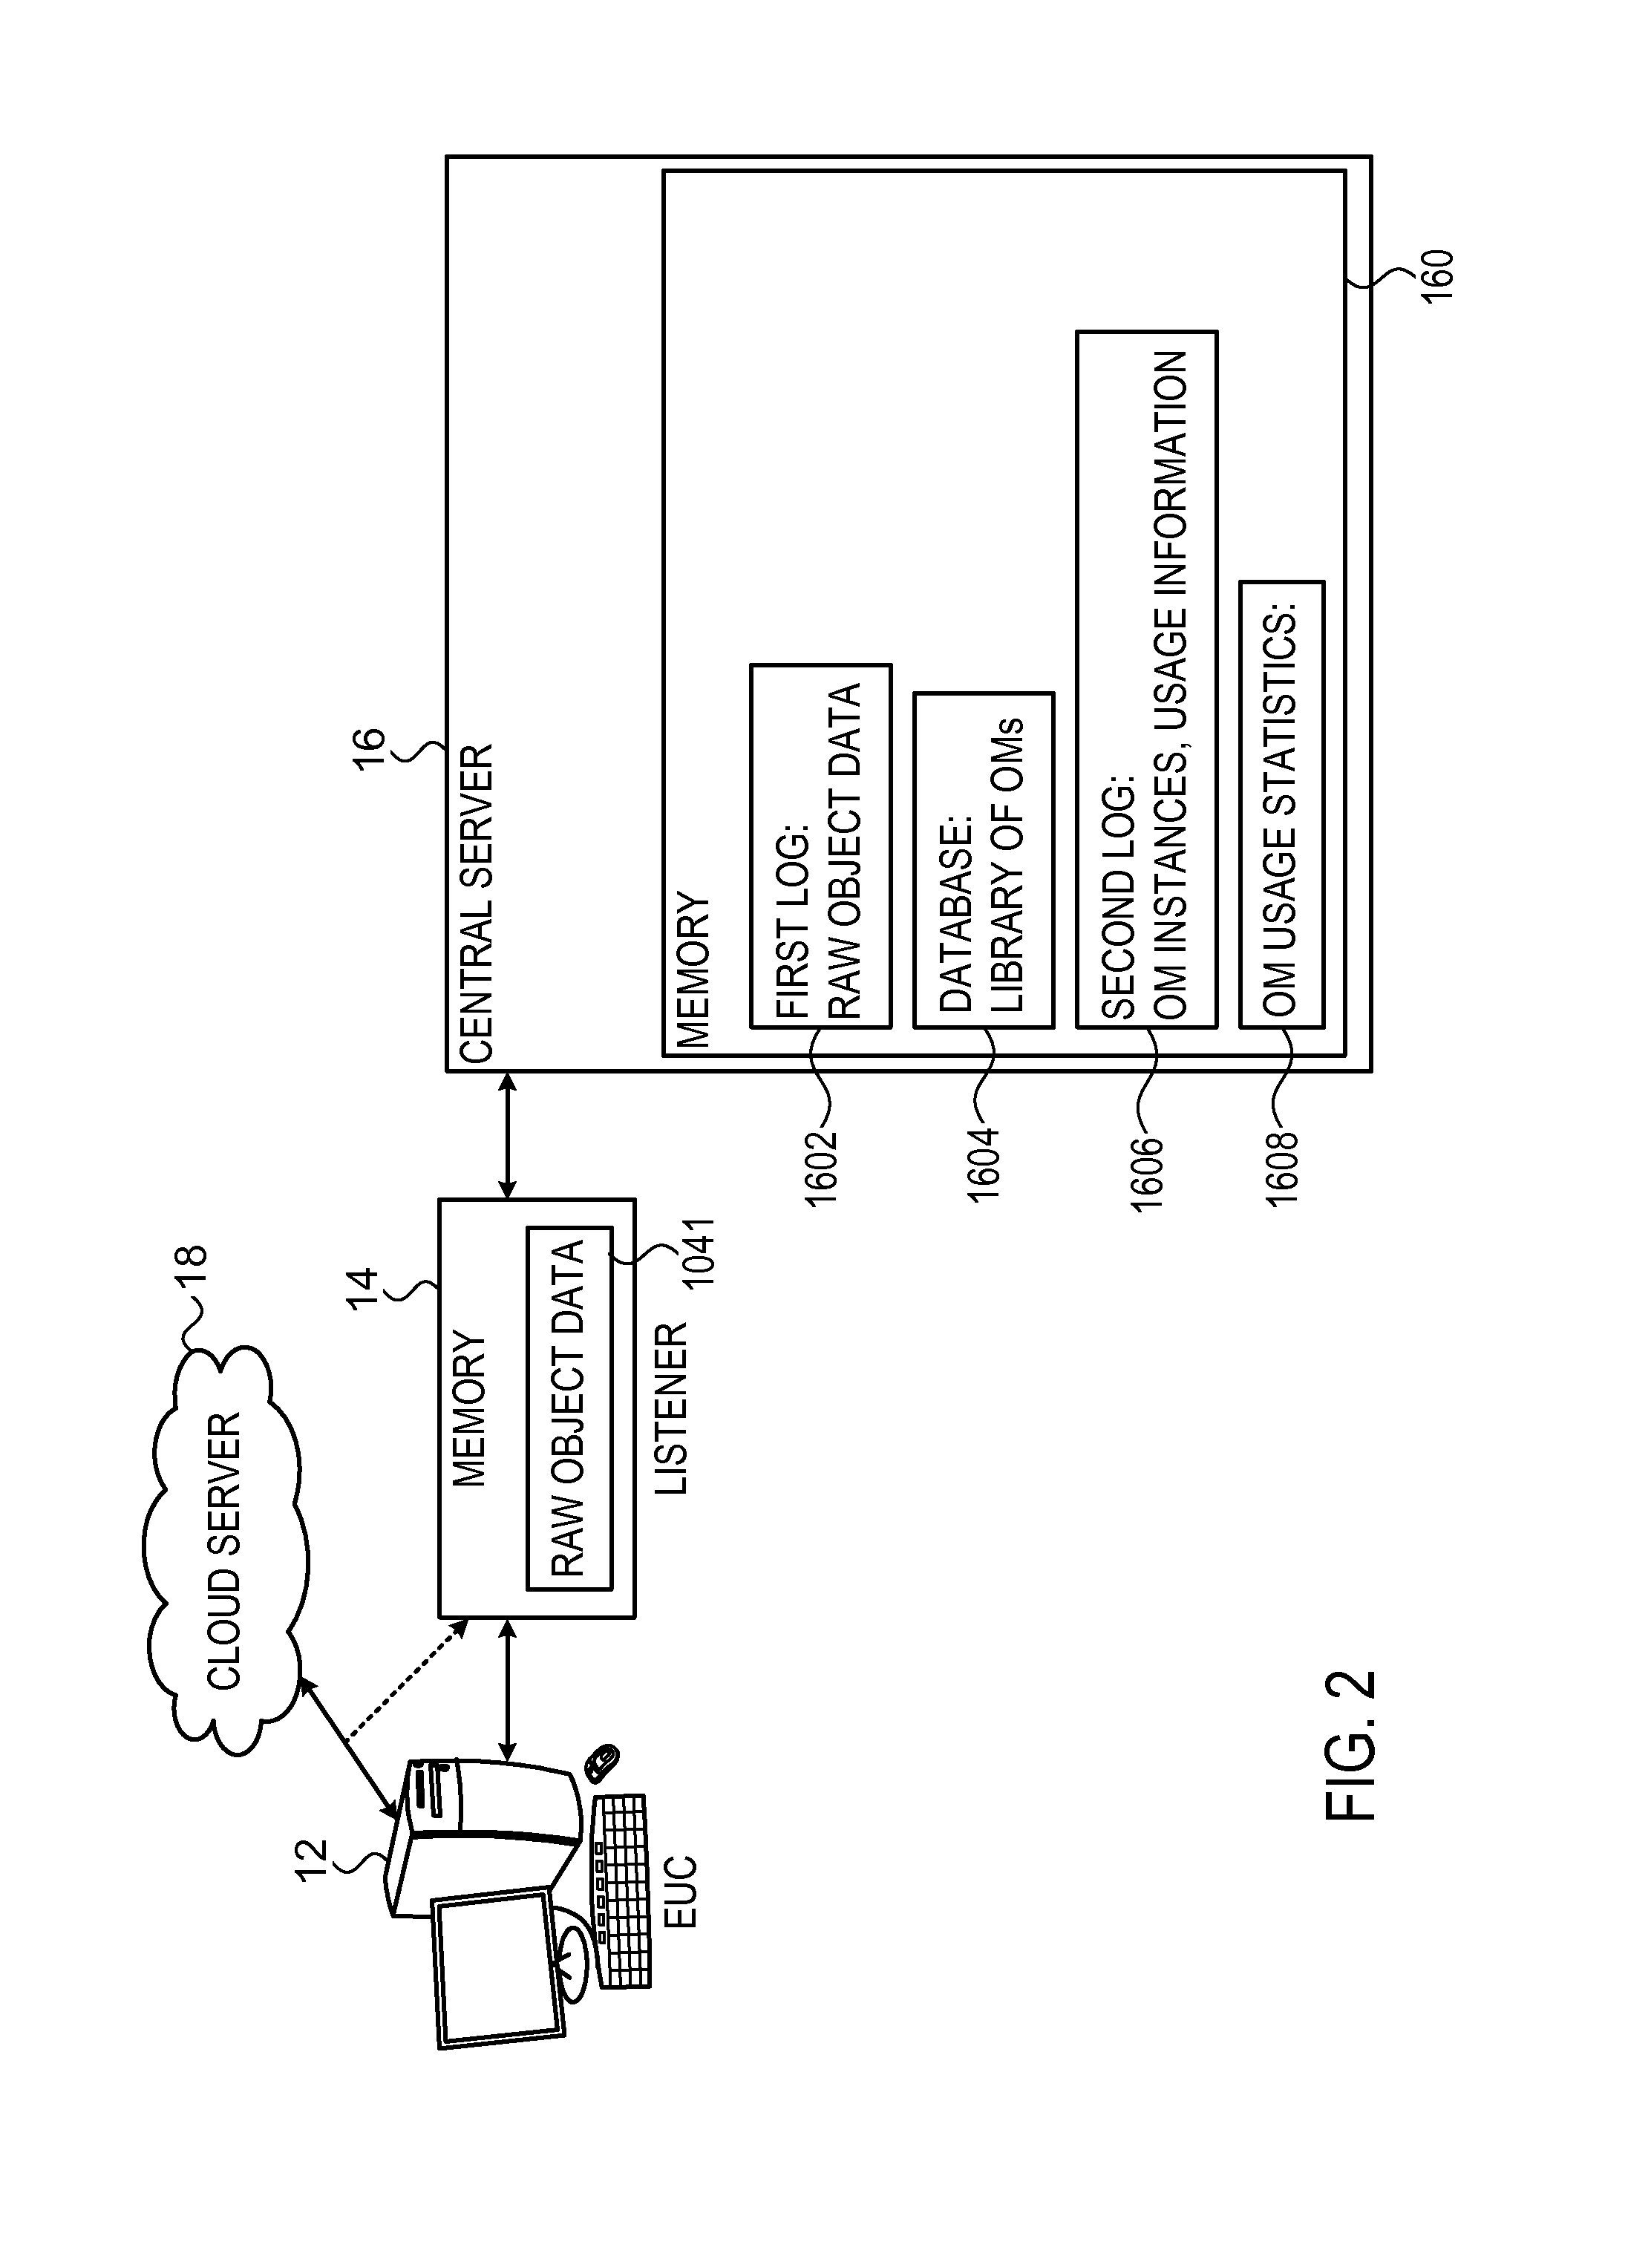 System for automated data measurement and analysis